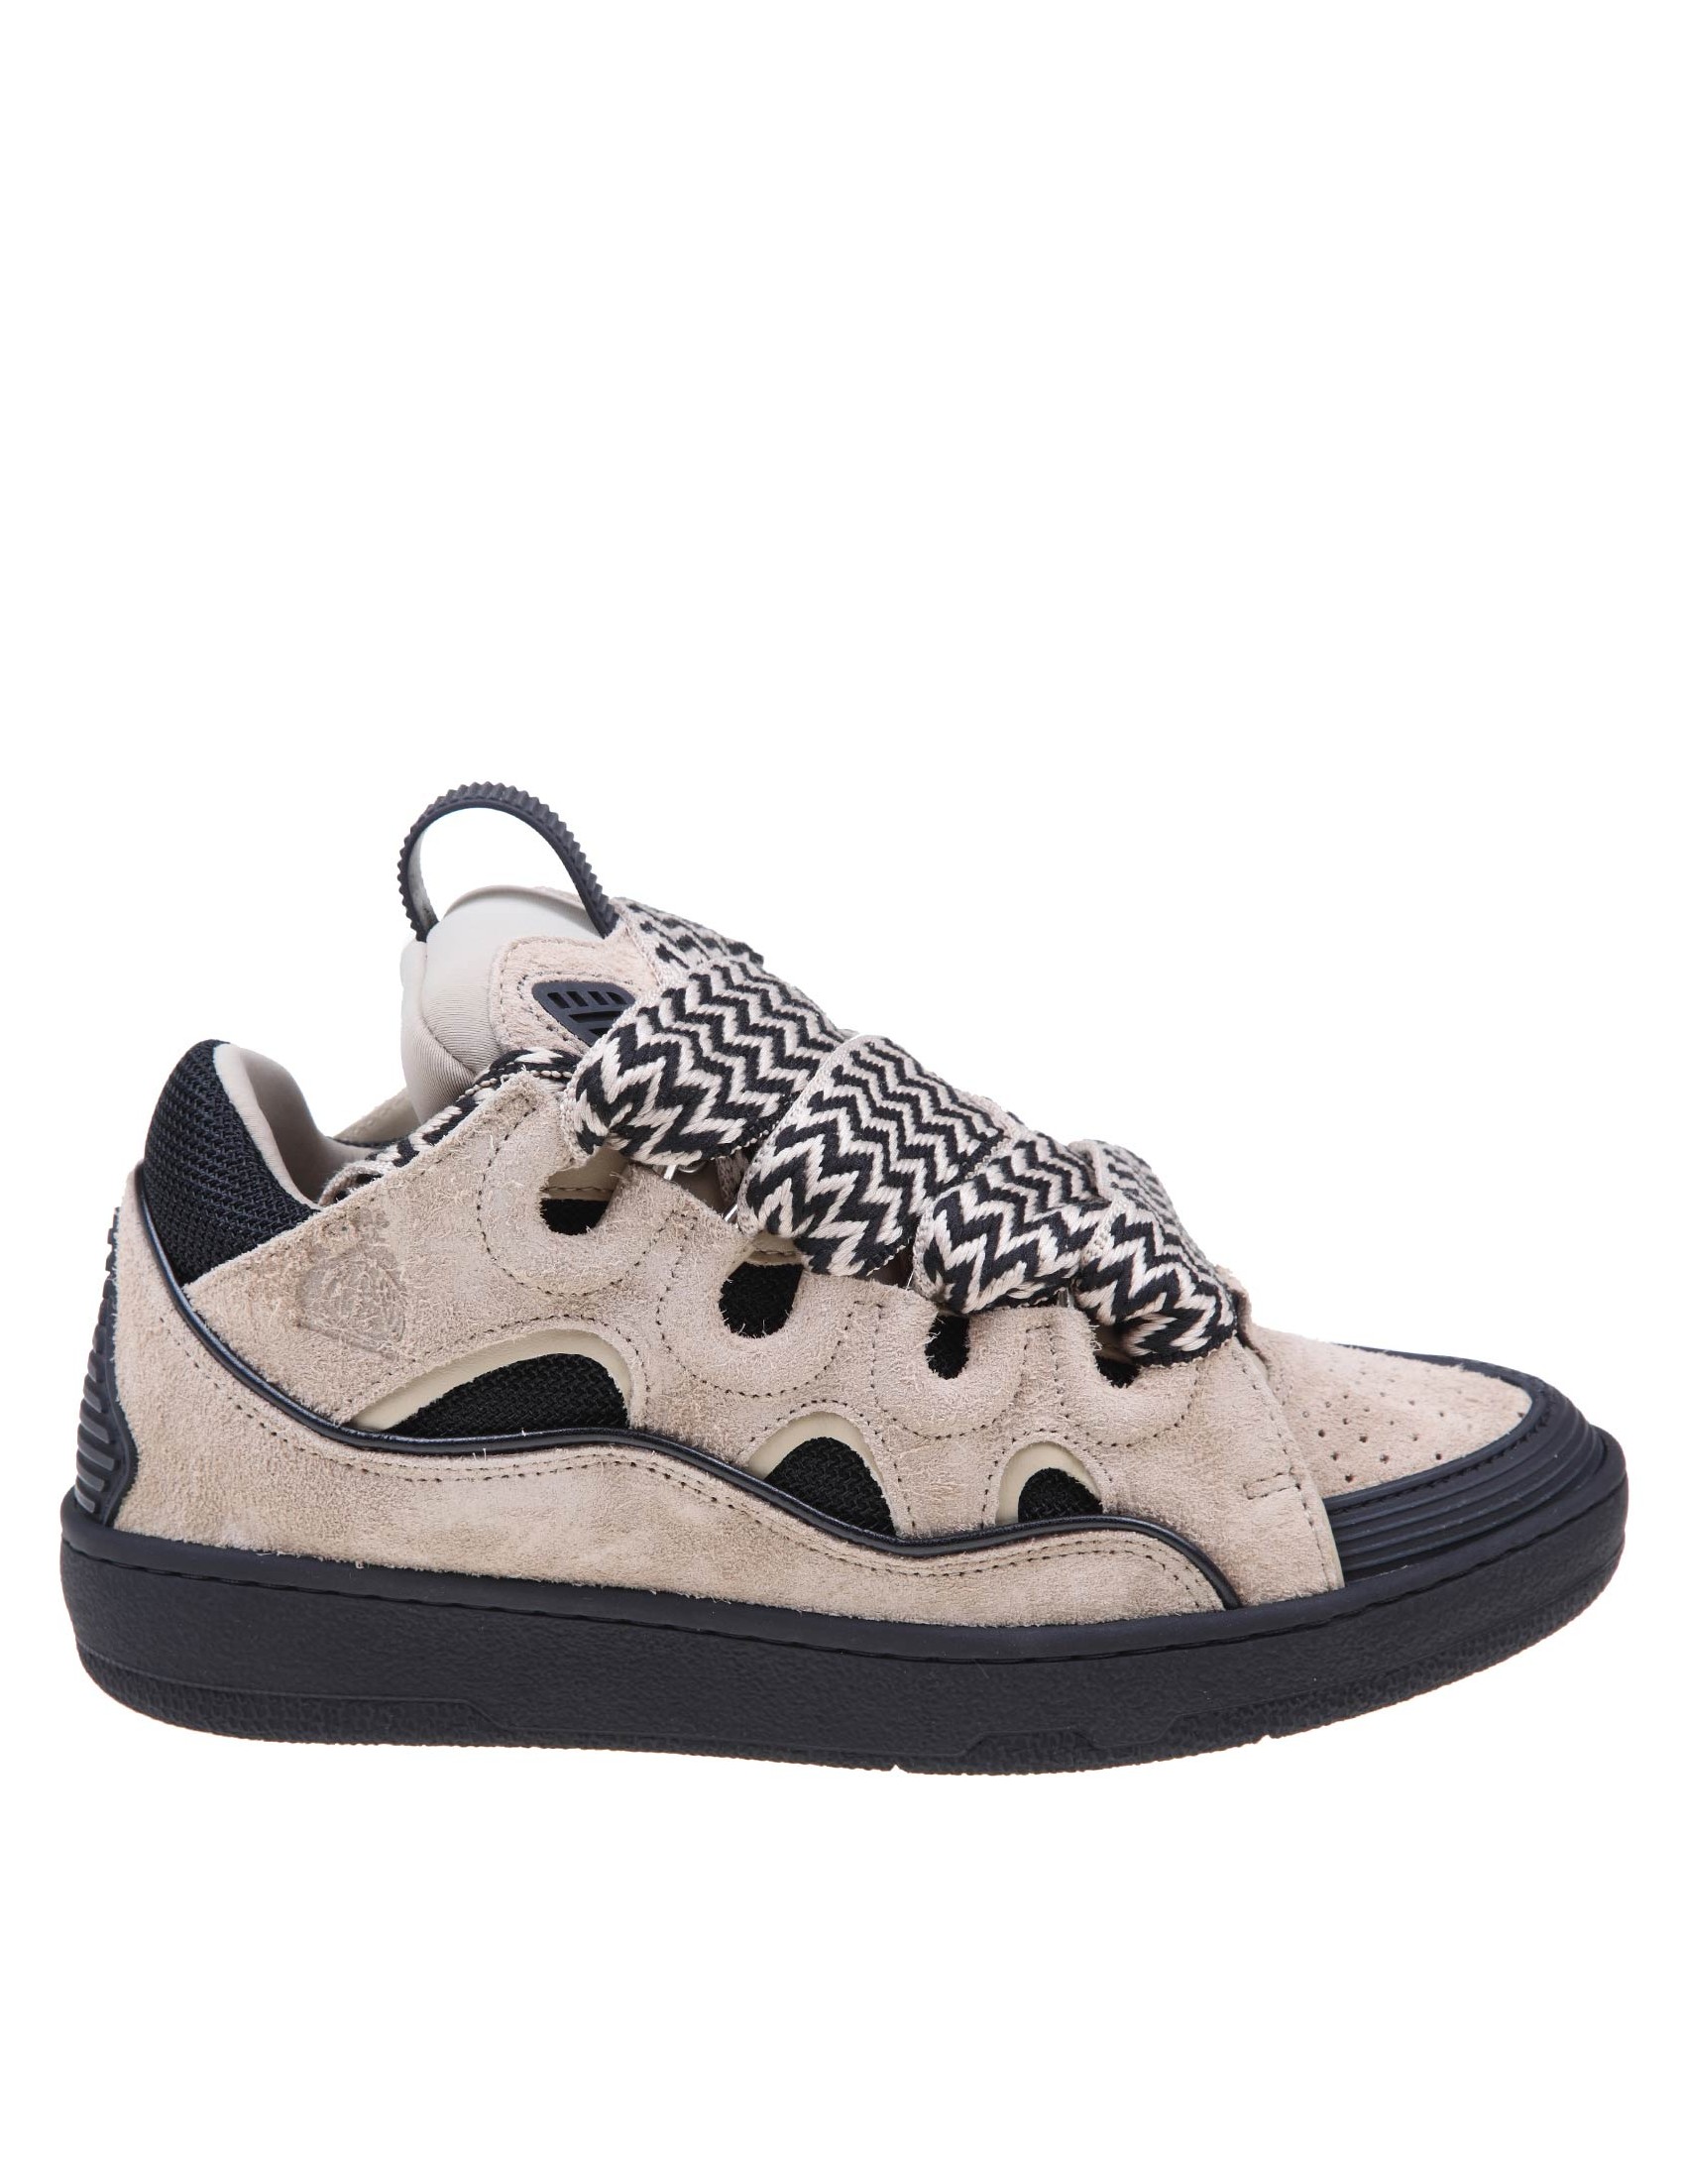 LANVIN CURB SNEAKERS IN LIGHT BROWN LEATHER